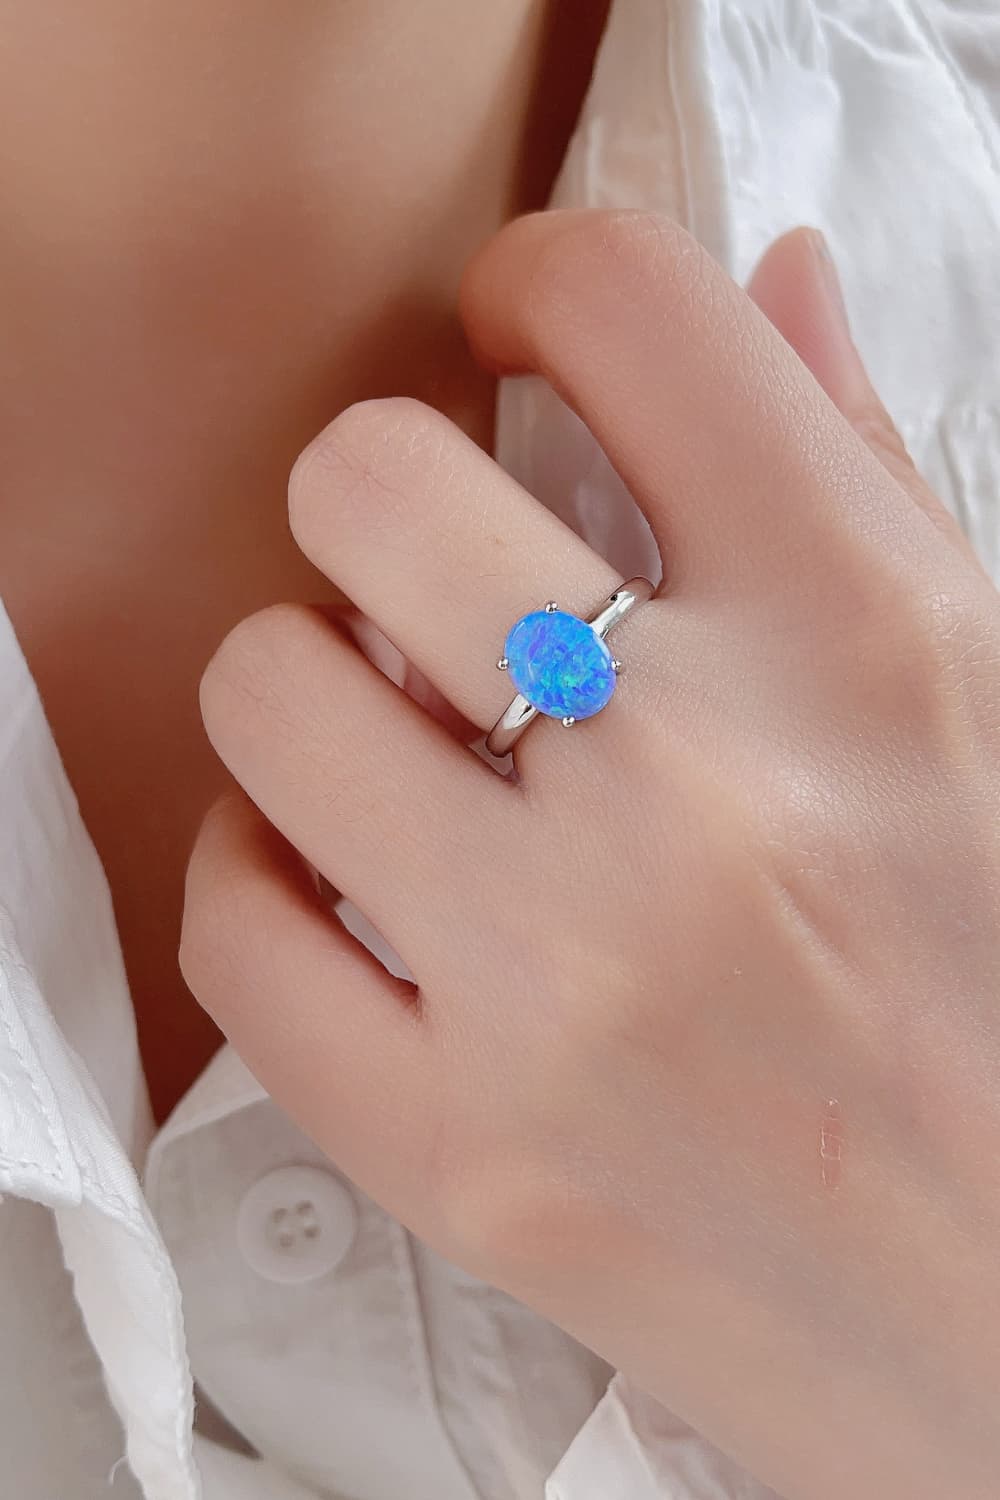 The Ocean is With Me Ring